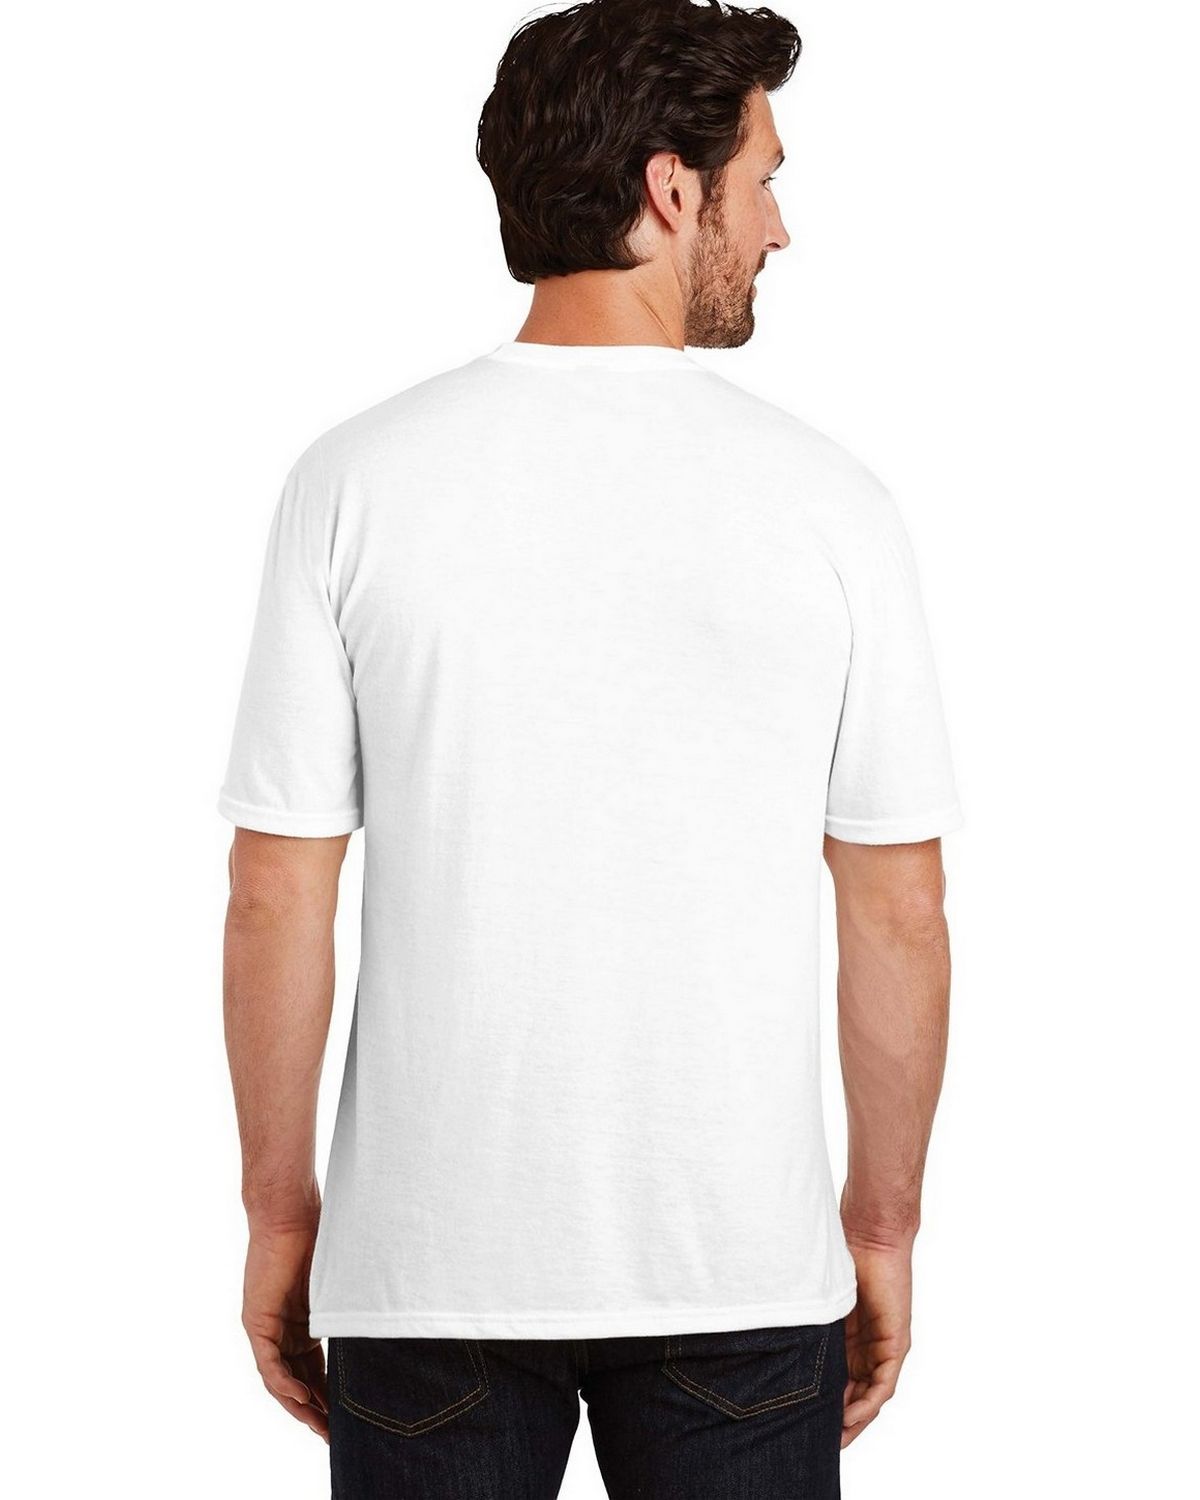 Size Chart for District DM130 Mens Perfect Tri Crew Tee